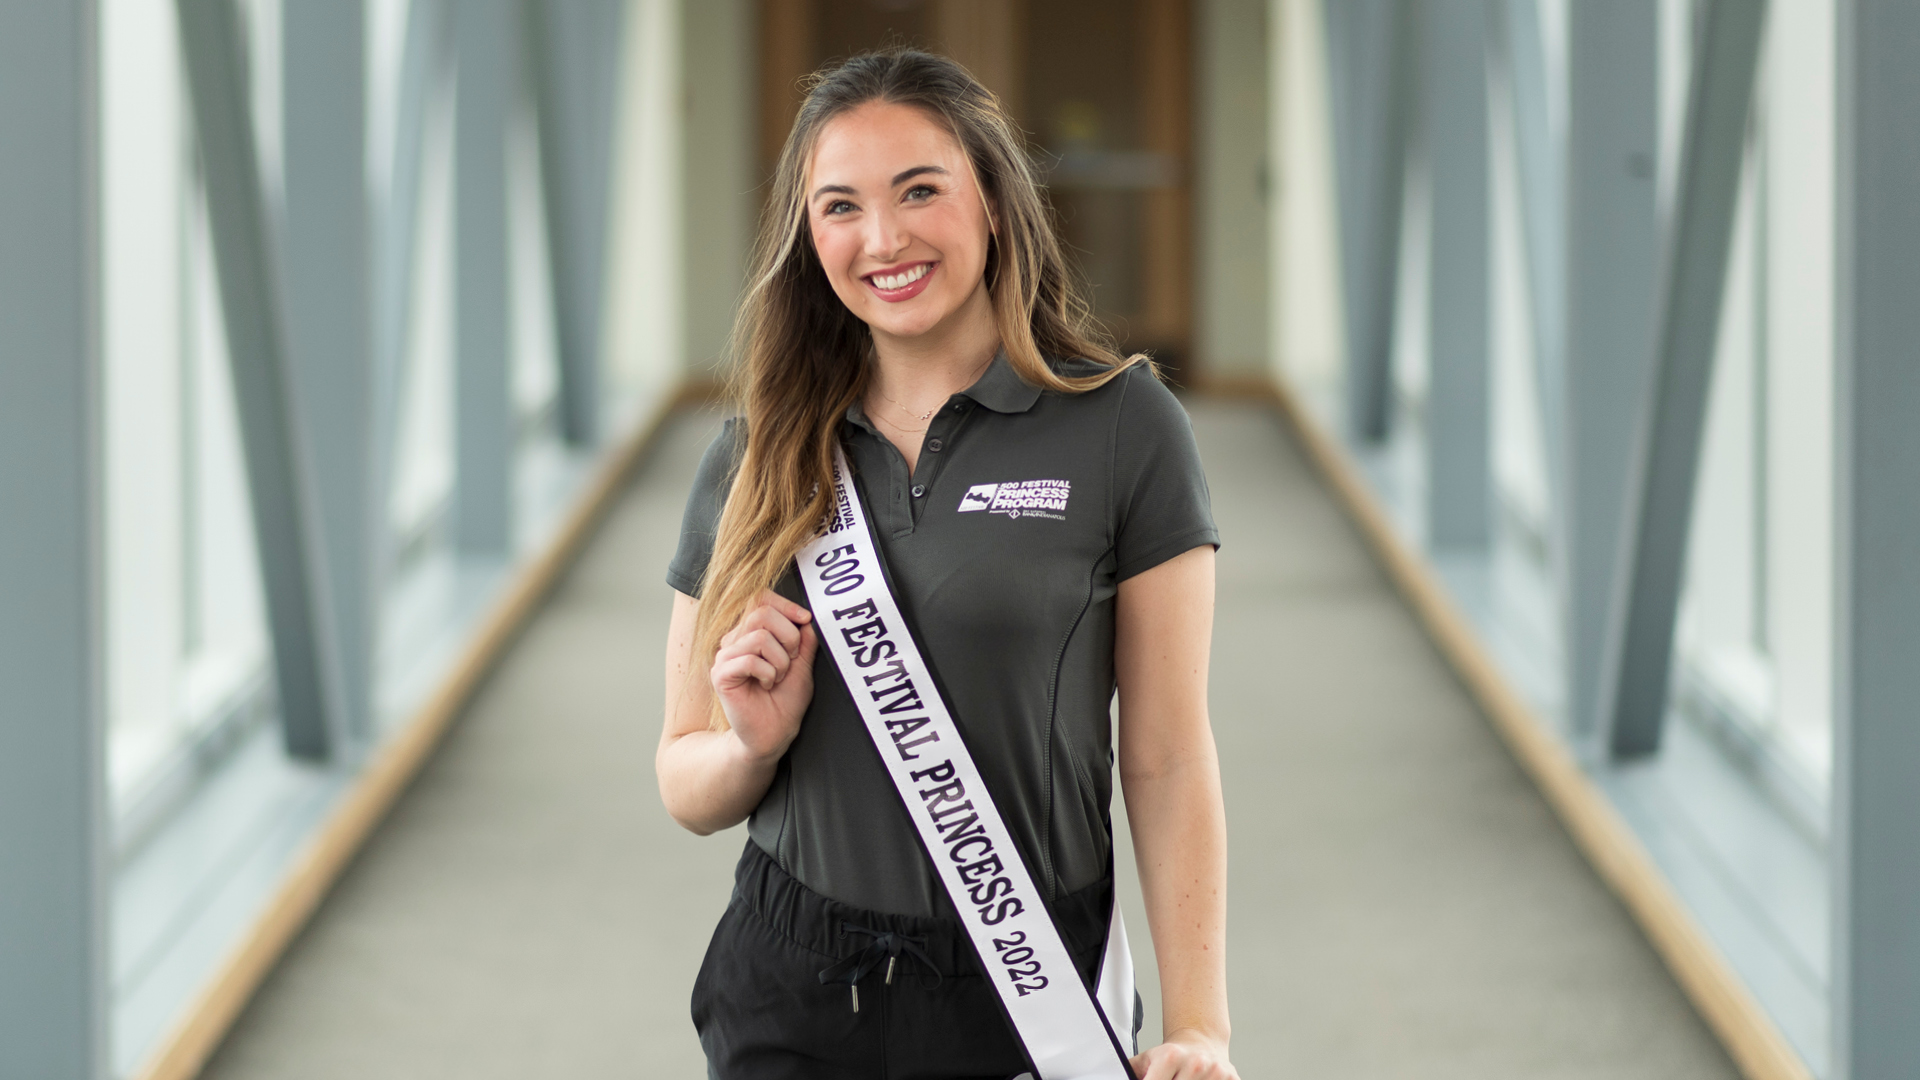 Senior Delaney Tejcek, pre-law, communications and history minors, ’22, is one of five Purdue women to be part of the 2022 500 Festival Princess program.